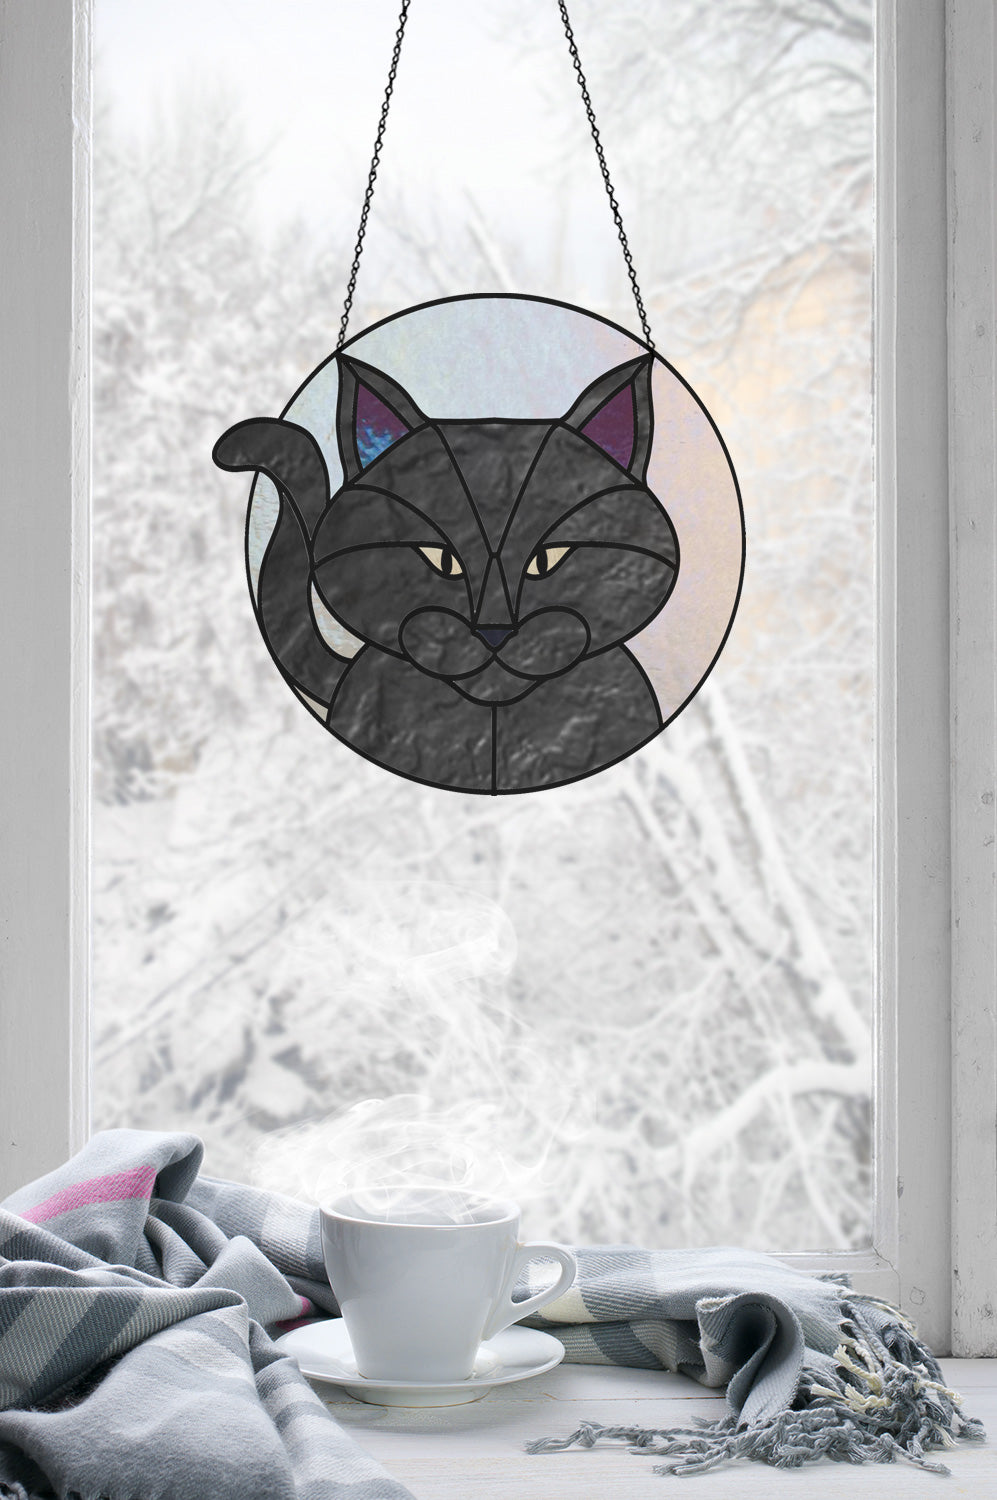 Full Moon Halloween Black Cat Stained Glass Pattern